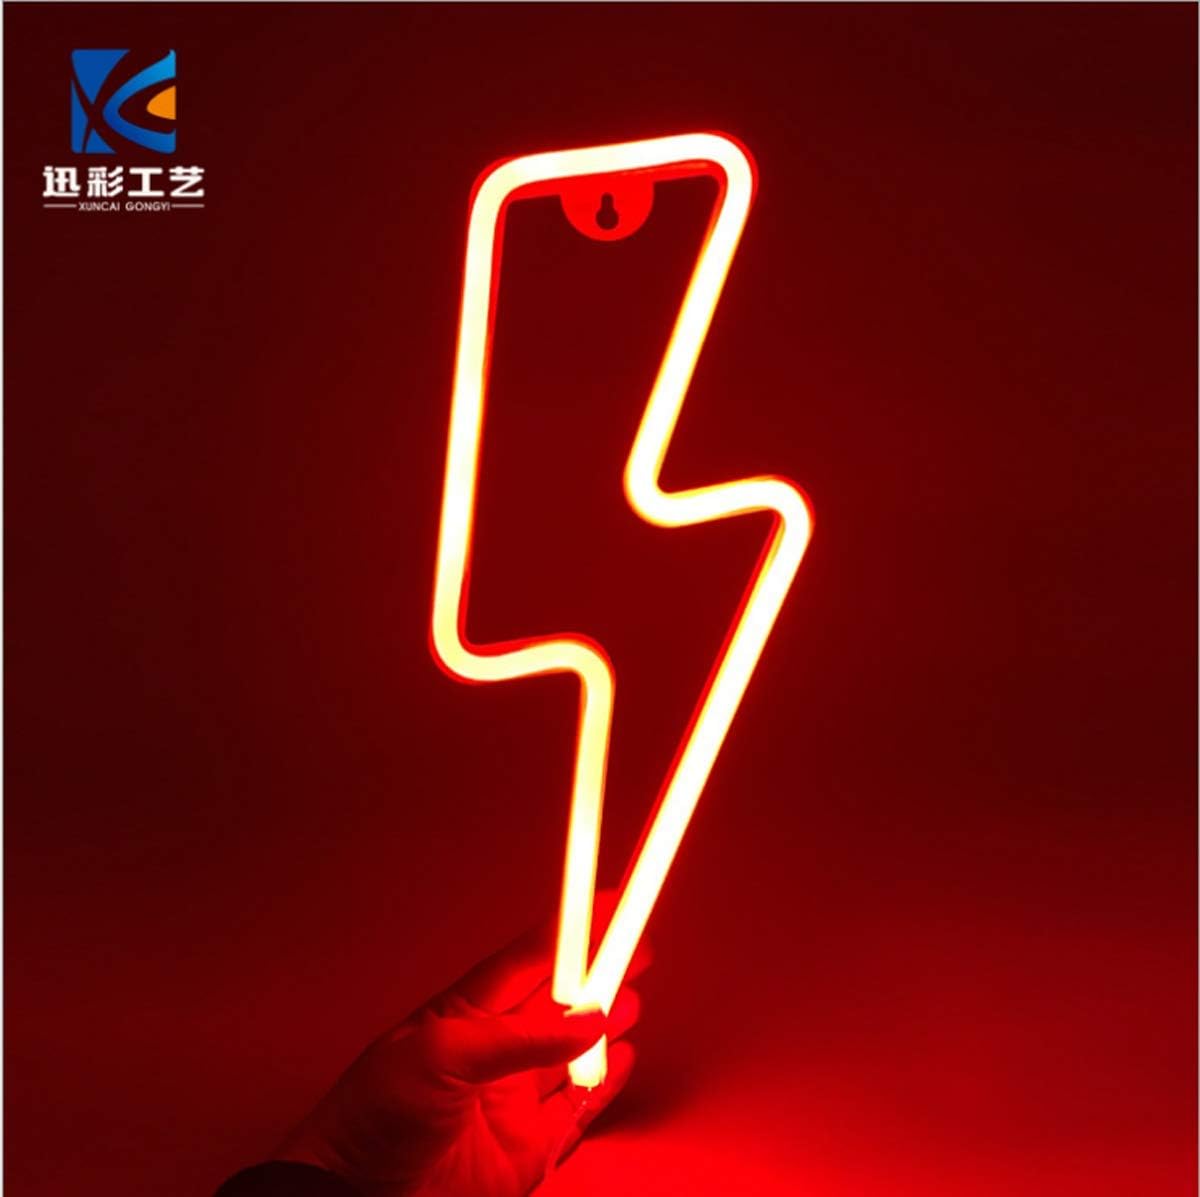 LDGJ Neon Light Sign Home Beer Bar Pub Recreation Room Game Lights Windows Glass Wall Signs Party Birthday Bedroom Bedside Table Decoration Gifts (Not LED)